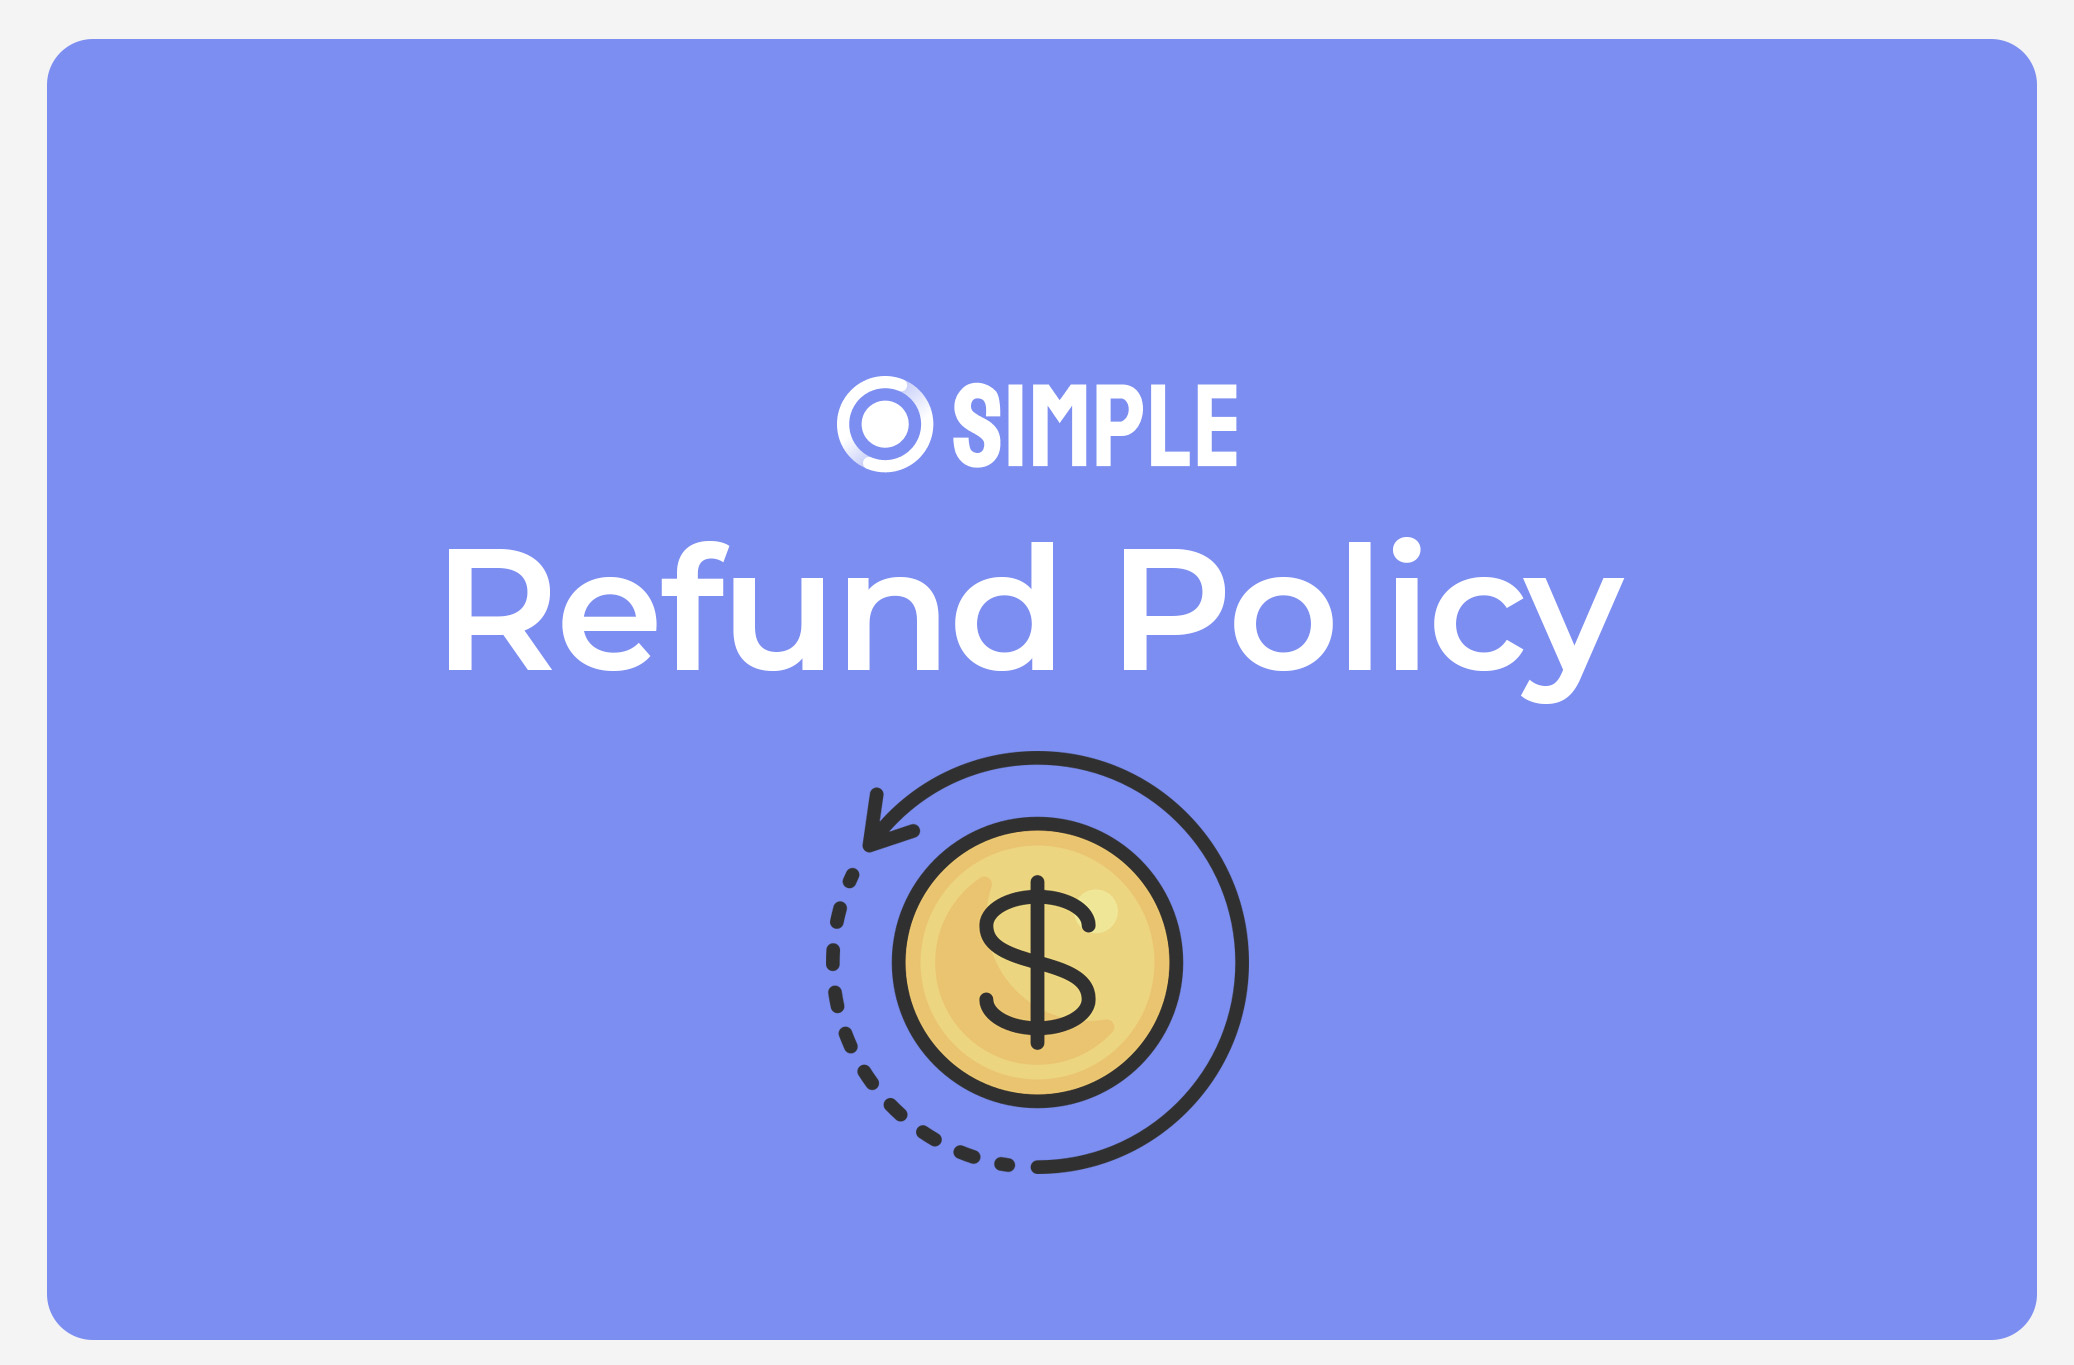 refund_policy_rounded.jpg